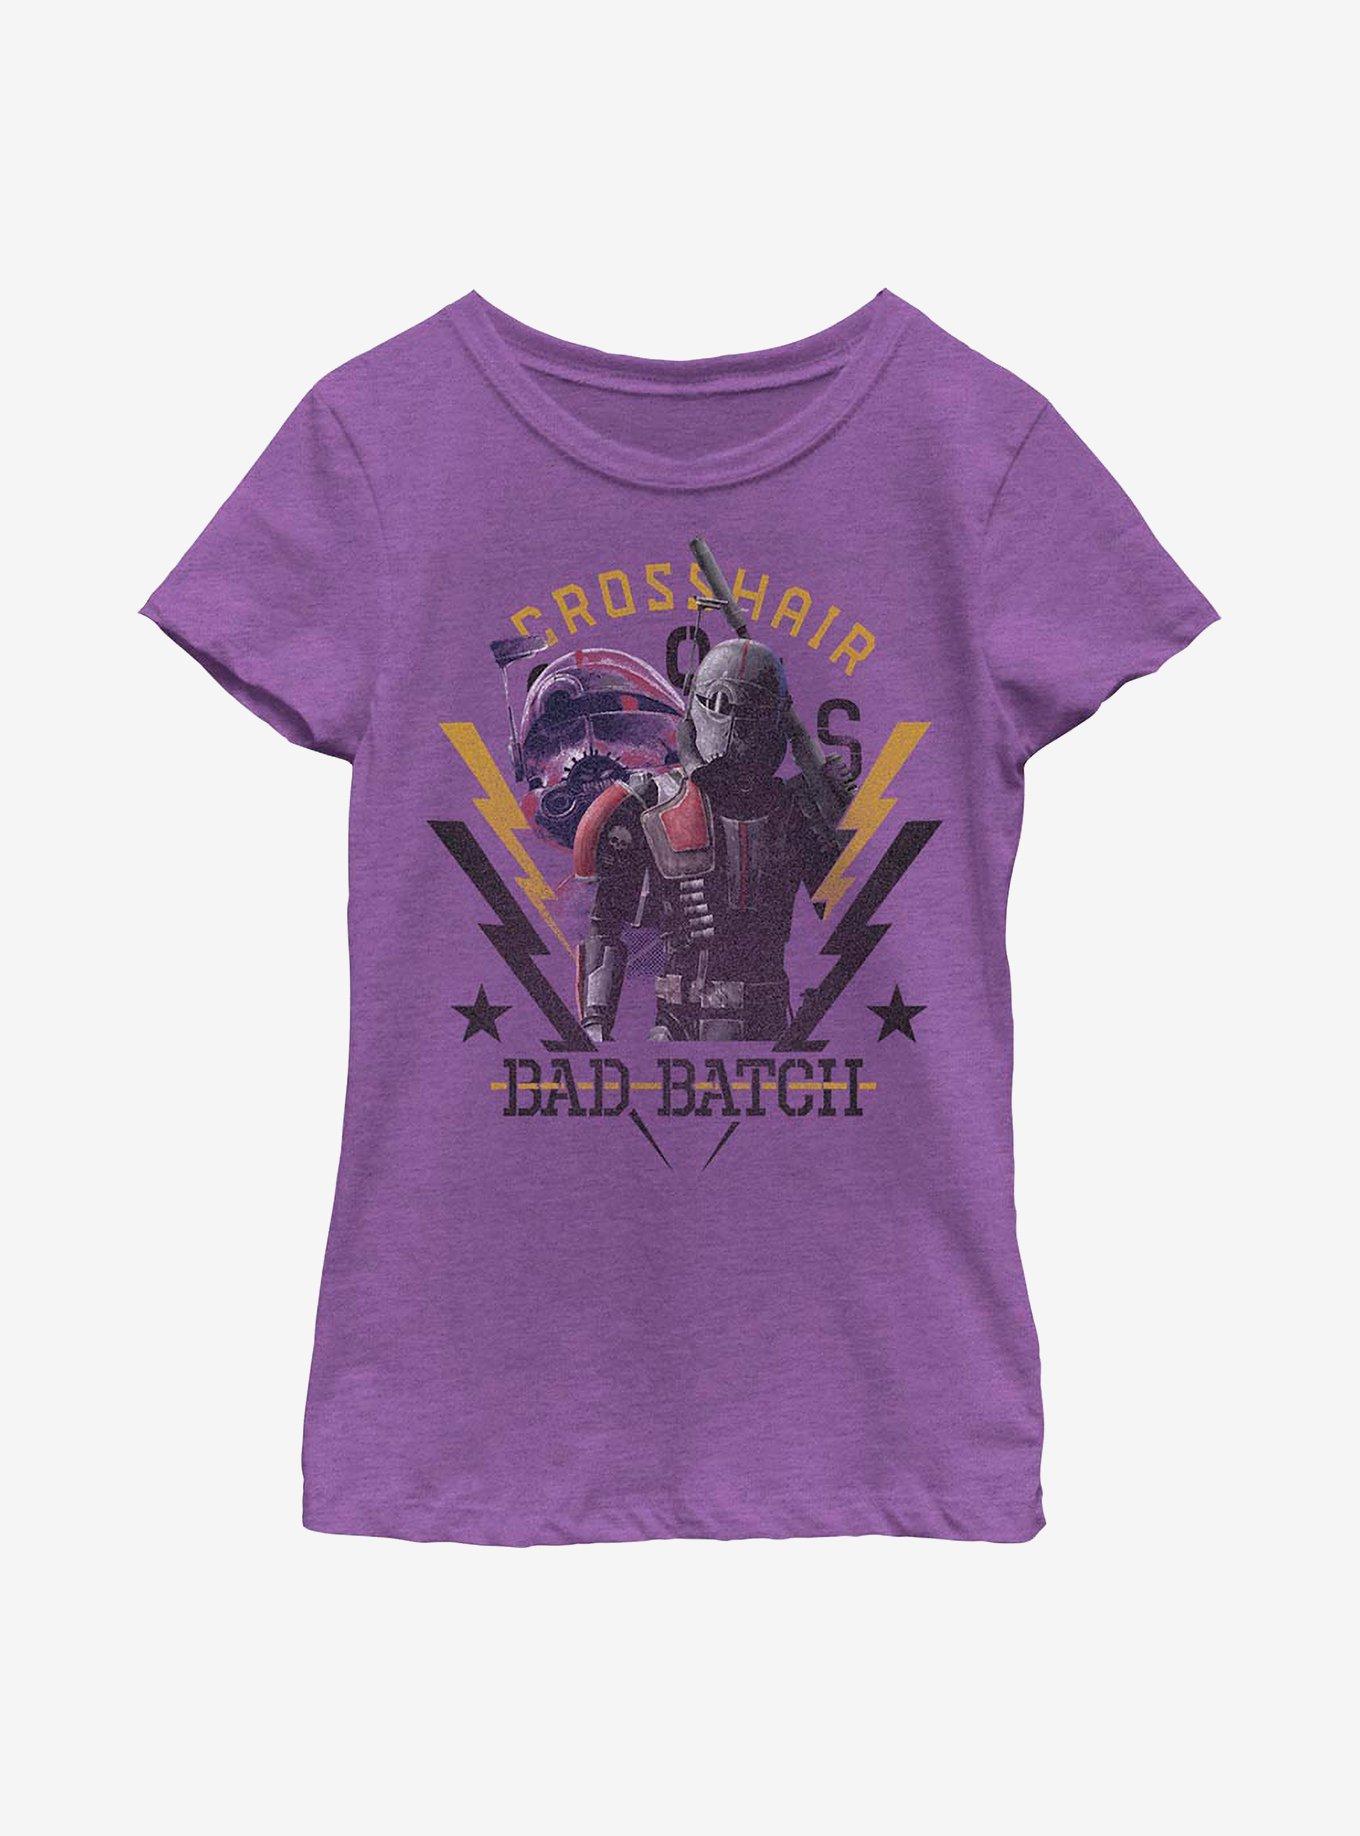 Star Wars: The Bad Batch Cross Army Crate Youth Girls T-Shirt, PURPLE BERRY, hi-res